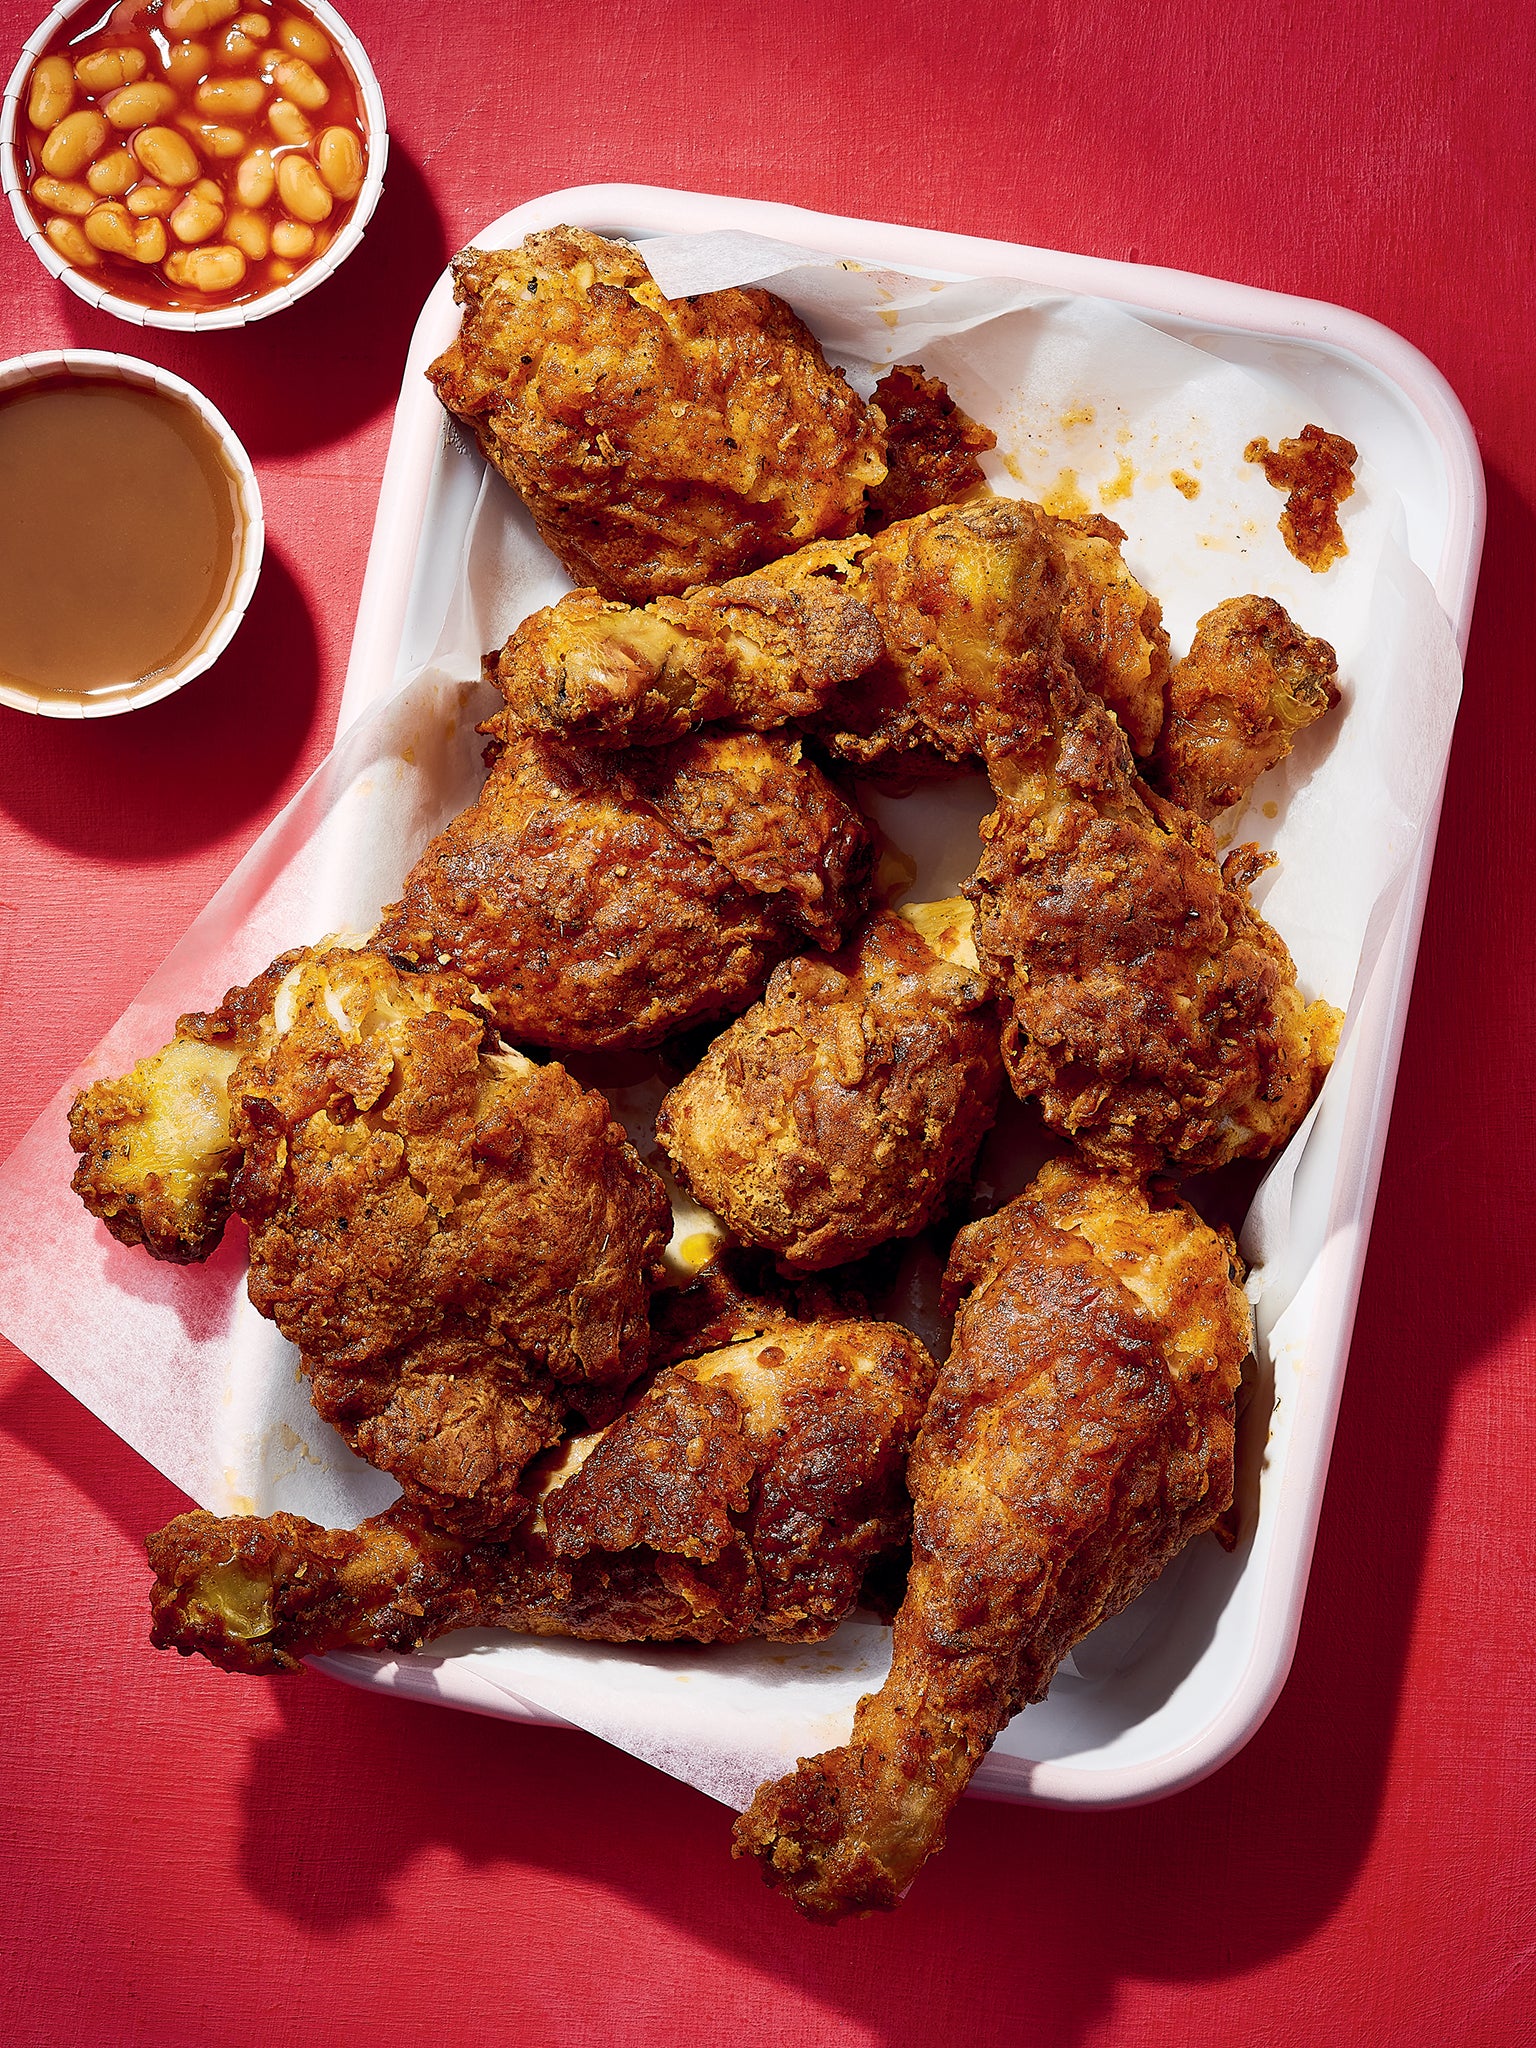 Ditch the takeaway and whip up this fried chicken in 30 minutes